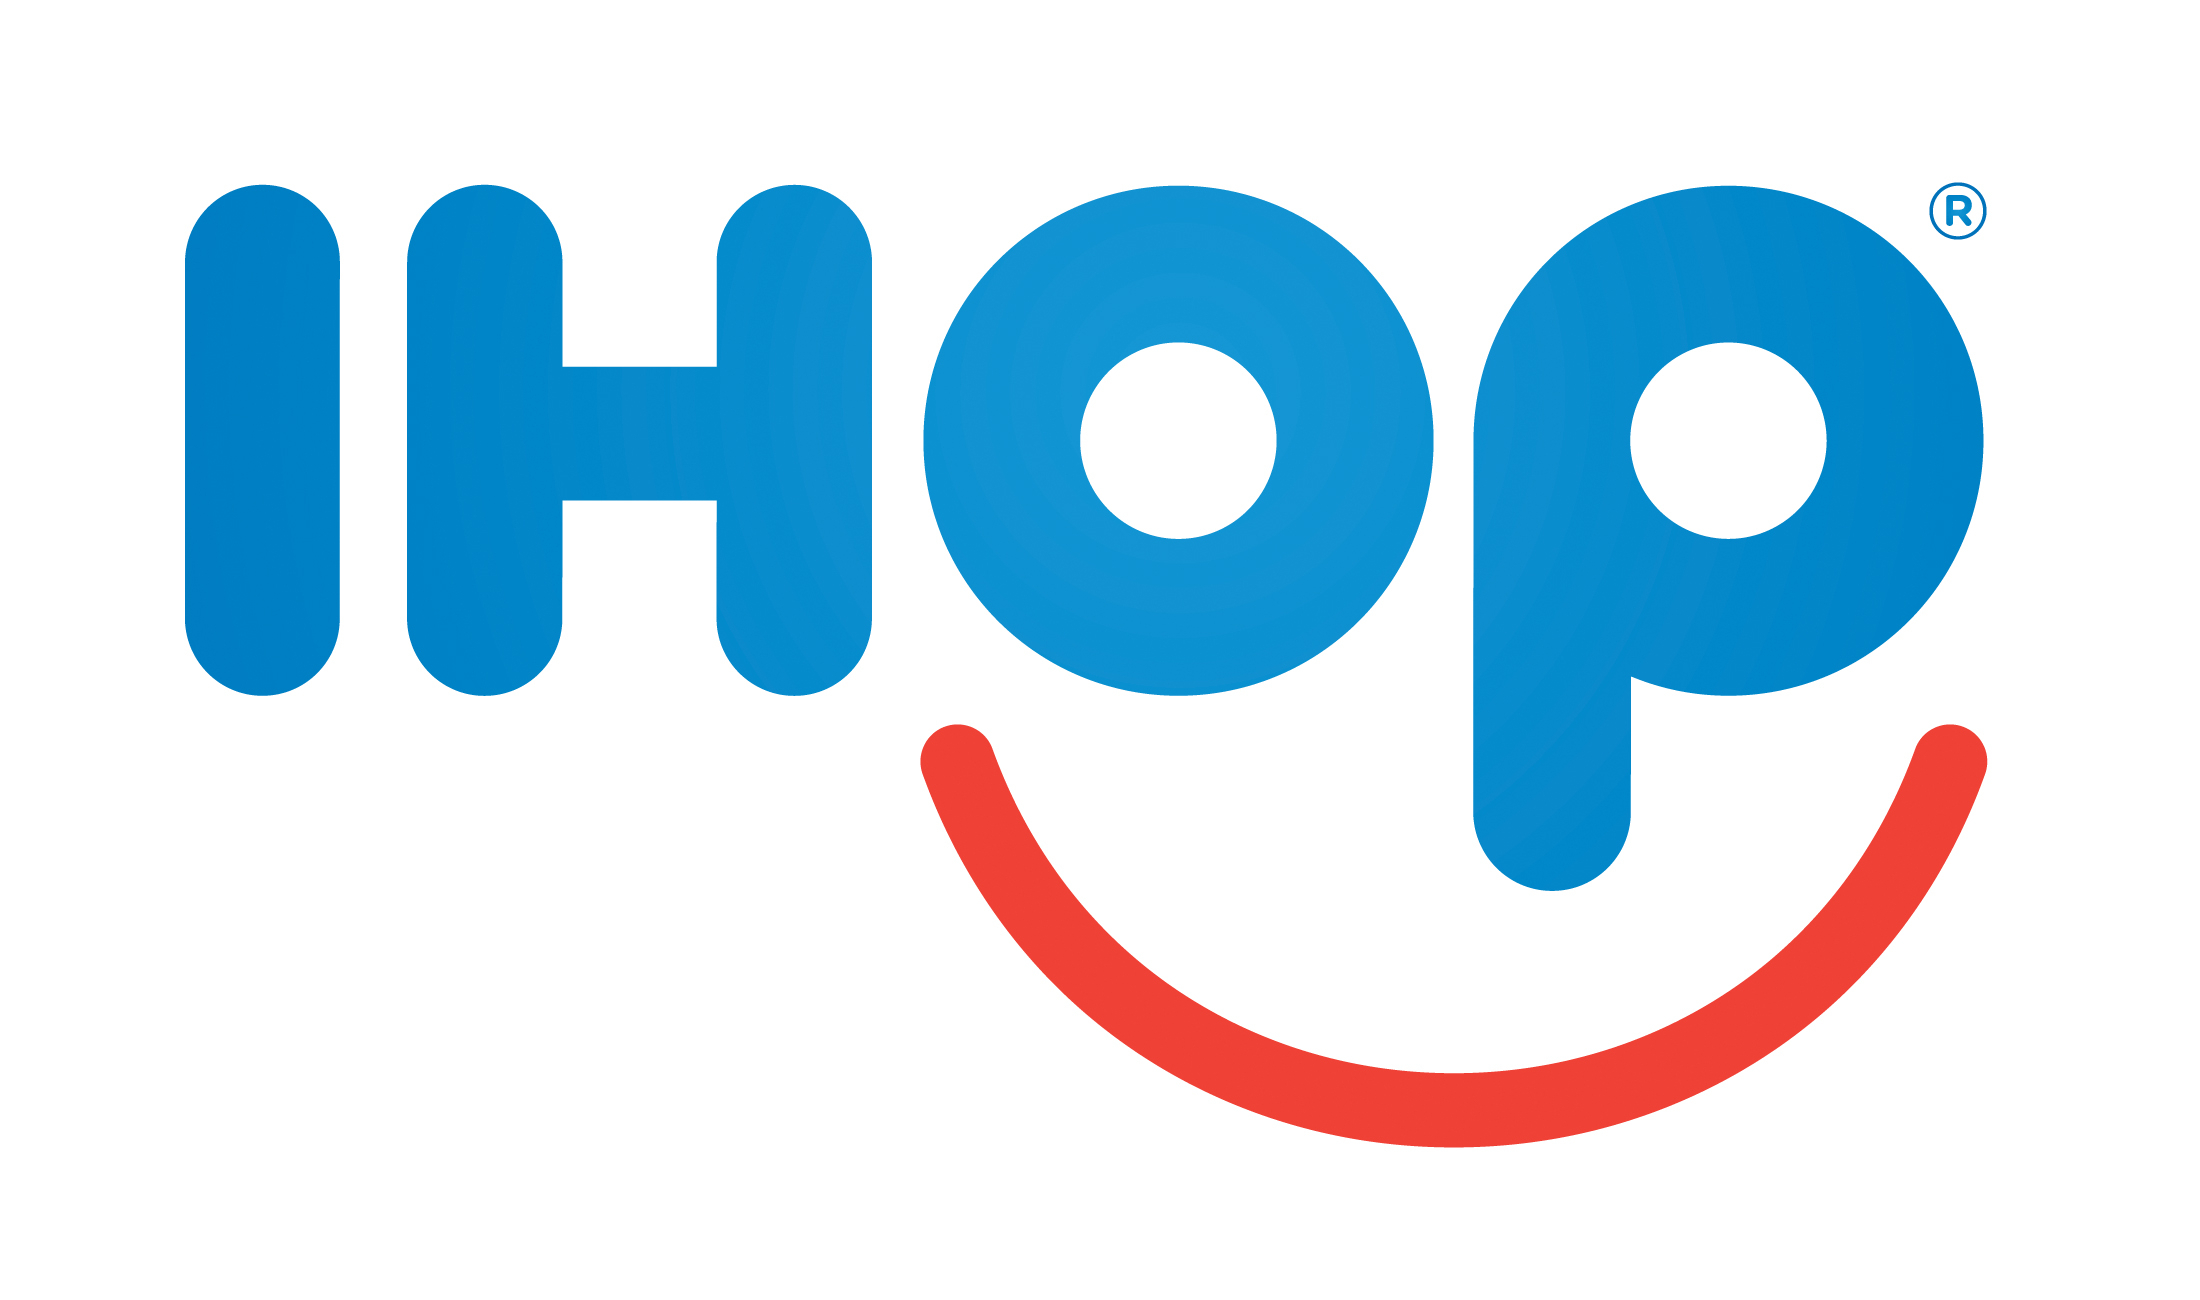 IHOP biscuits menu available nationwide for first time